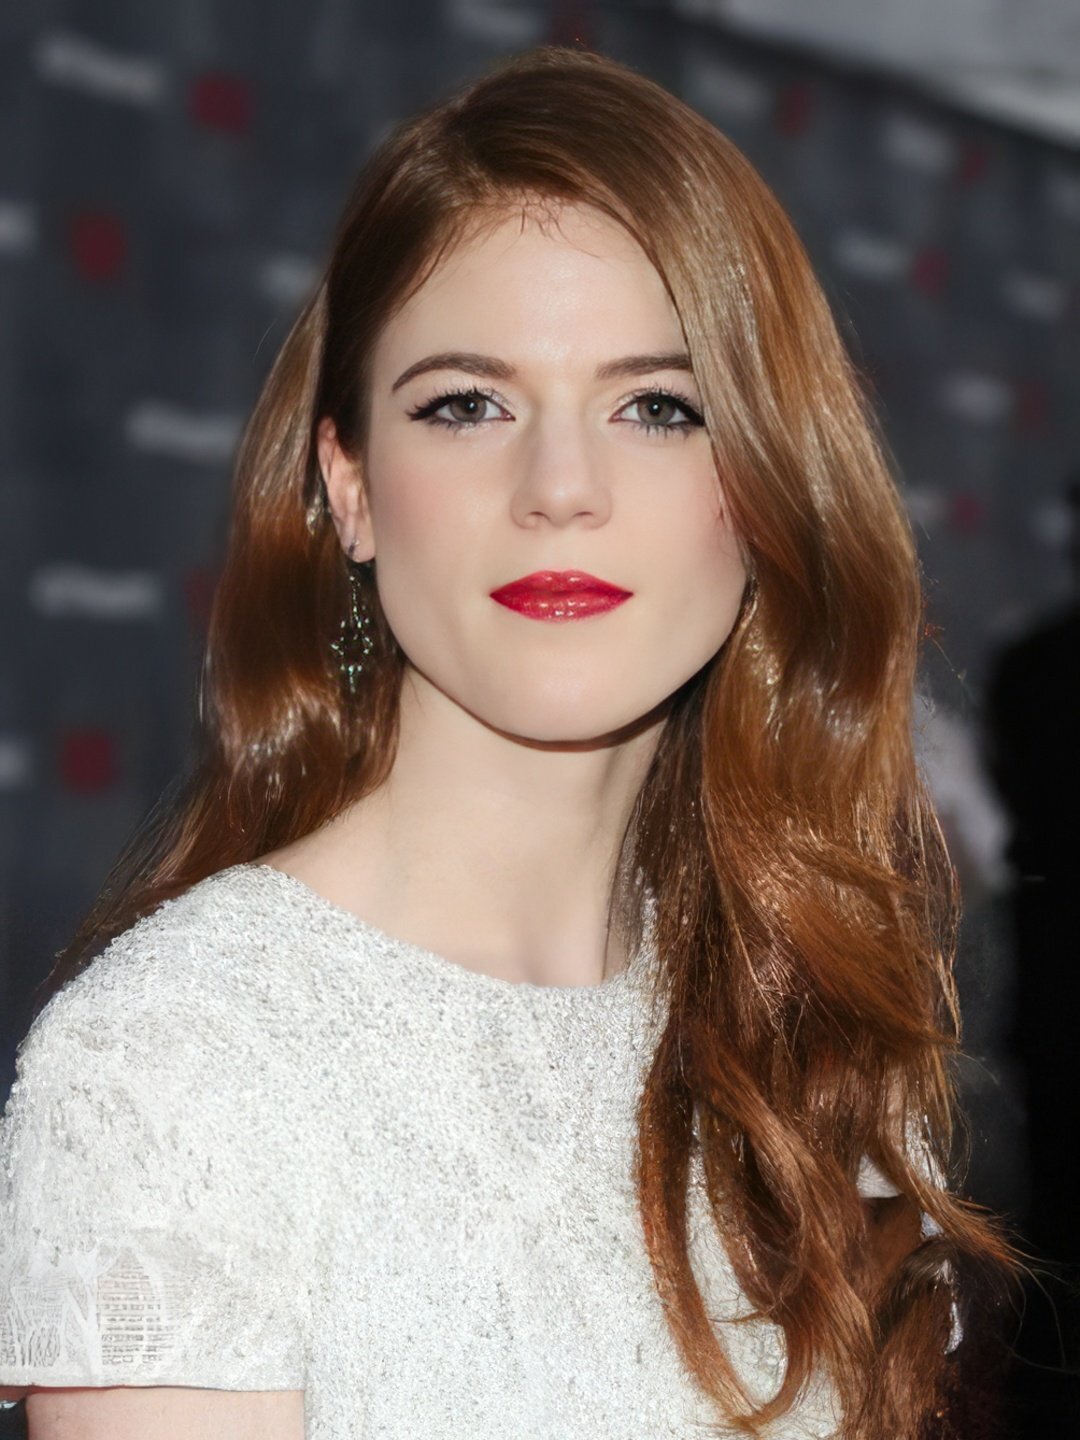 Rose Leslie where did she study